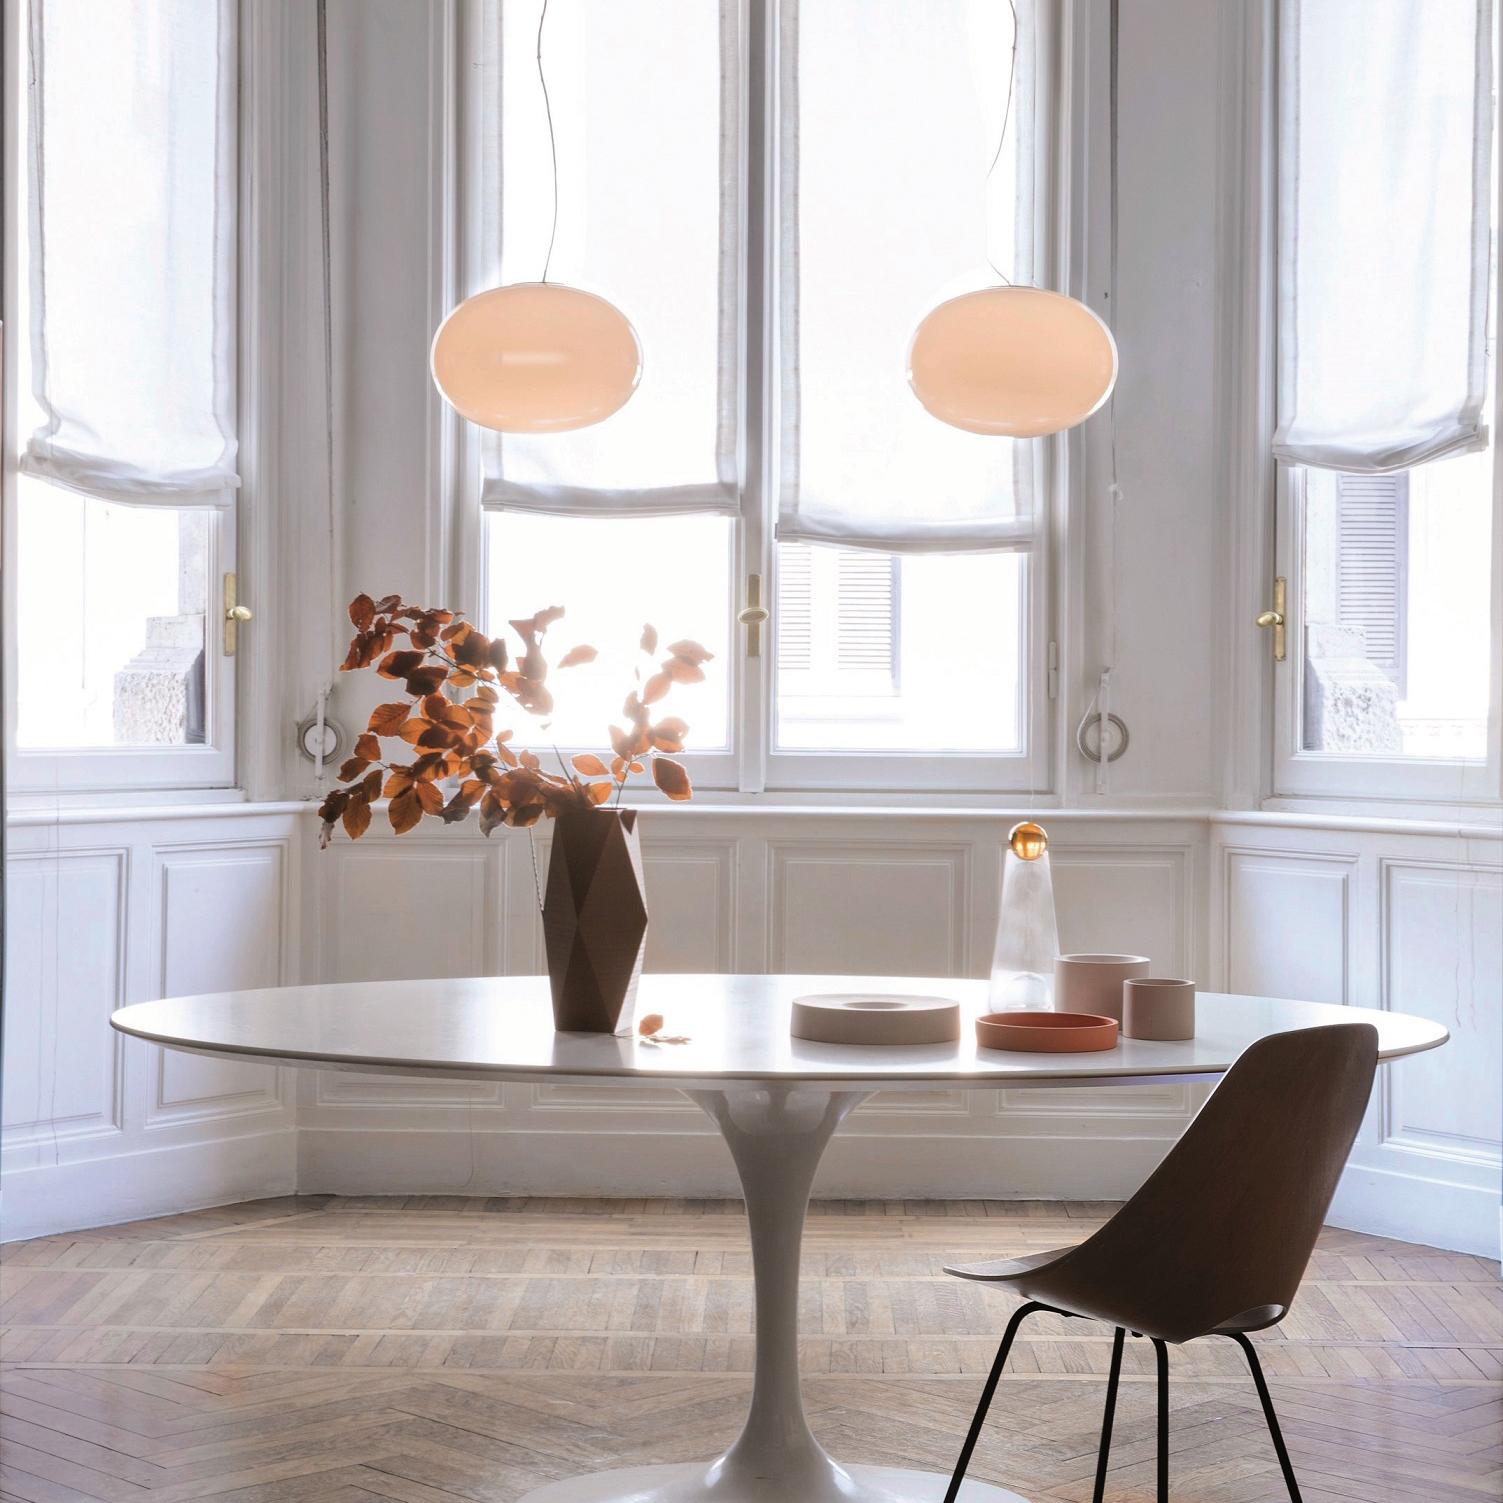 Italian Mariana Pellegrino Soto Suspension Lamp 'Alba' Without Structure by Oluce For Sale